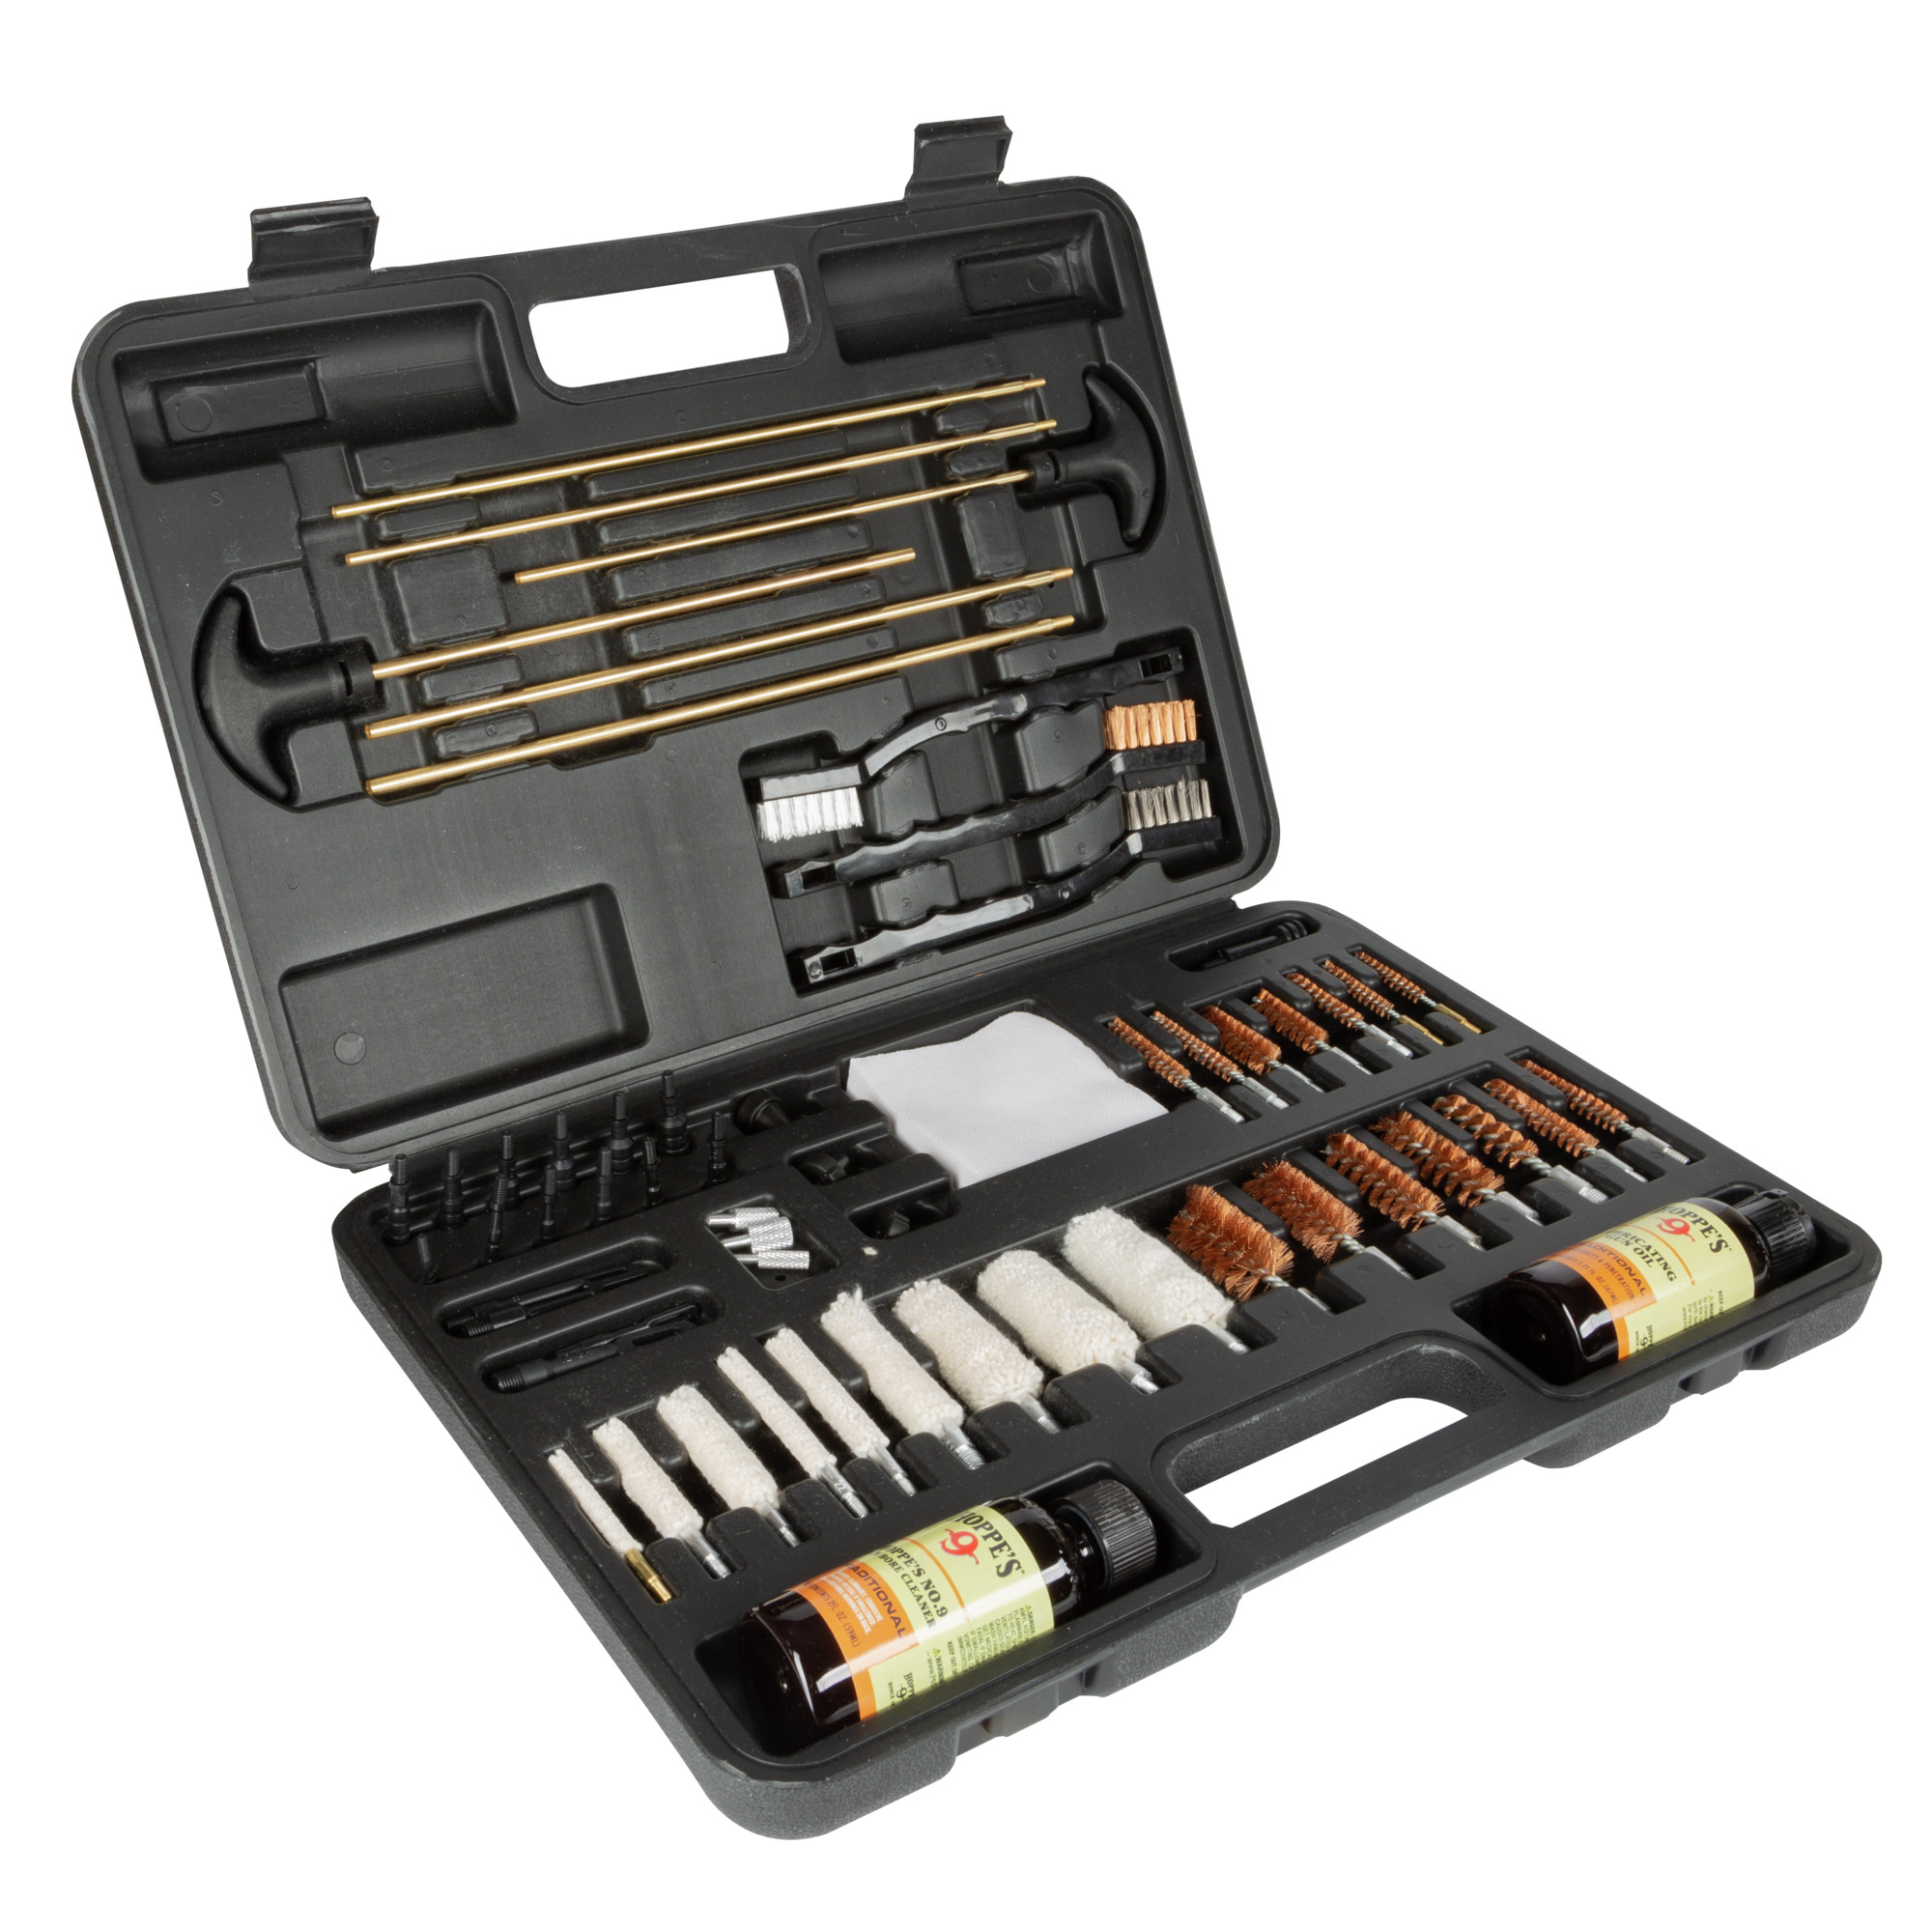 Buy Deluxe Gun Cleaning Kit and More